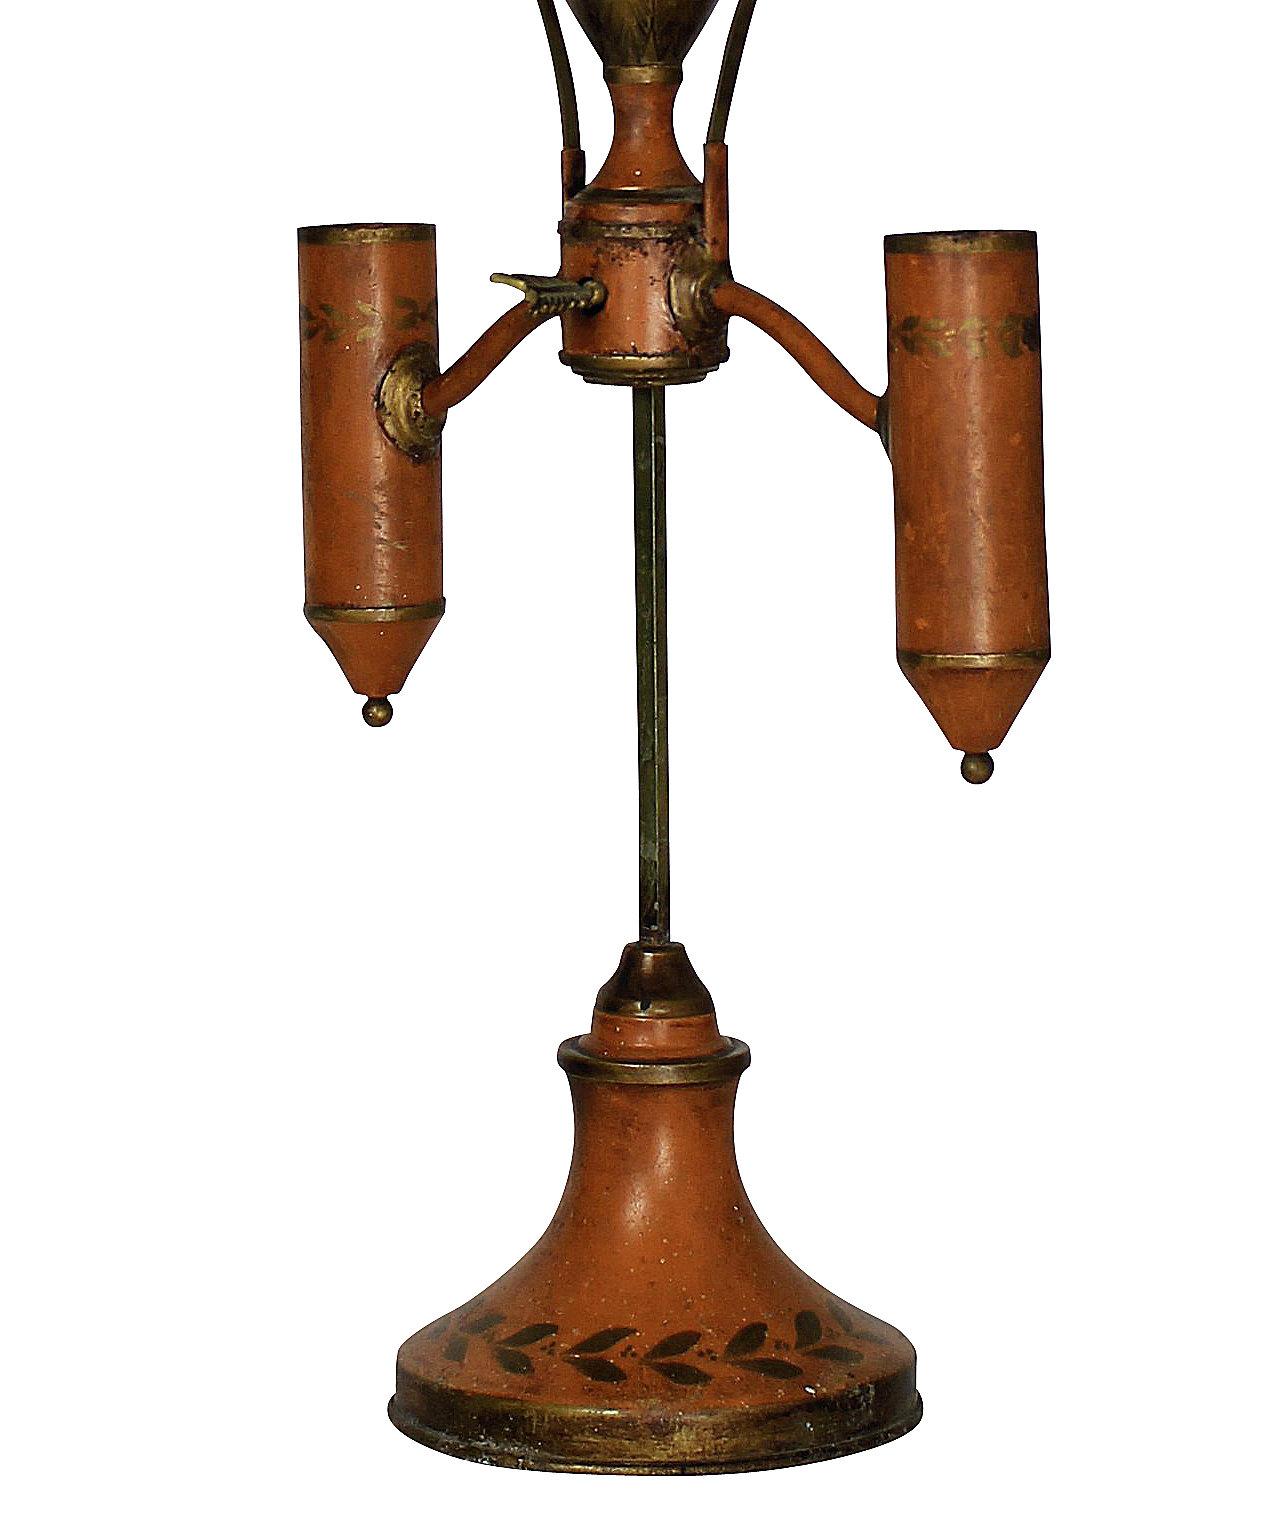 A French Napoleon III hand painted tole desk lamp in orange and gold leaf, with adjustable brass shades. In the Napoleonic revival style, depicting bees.

